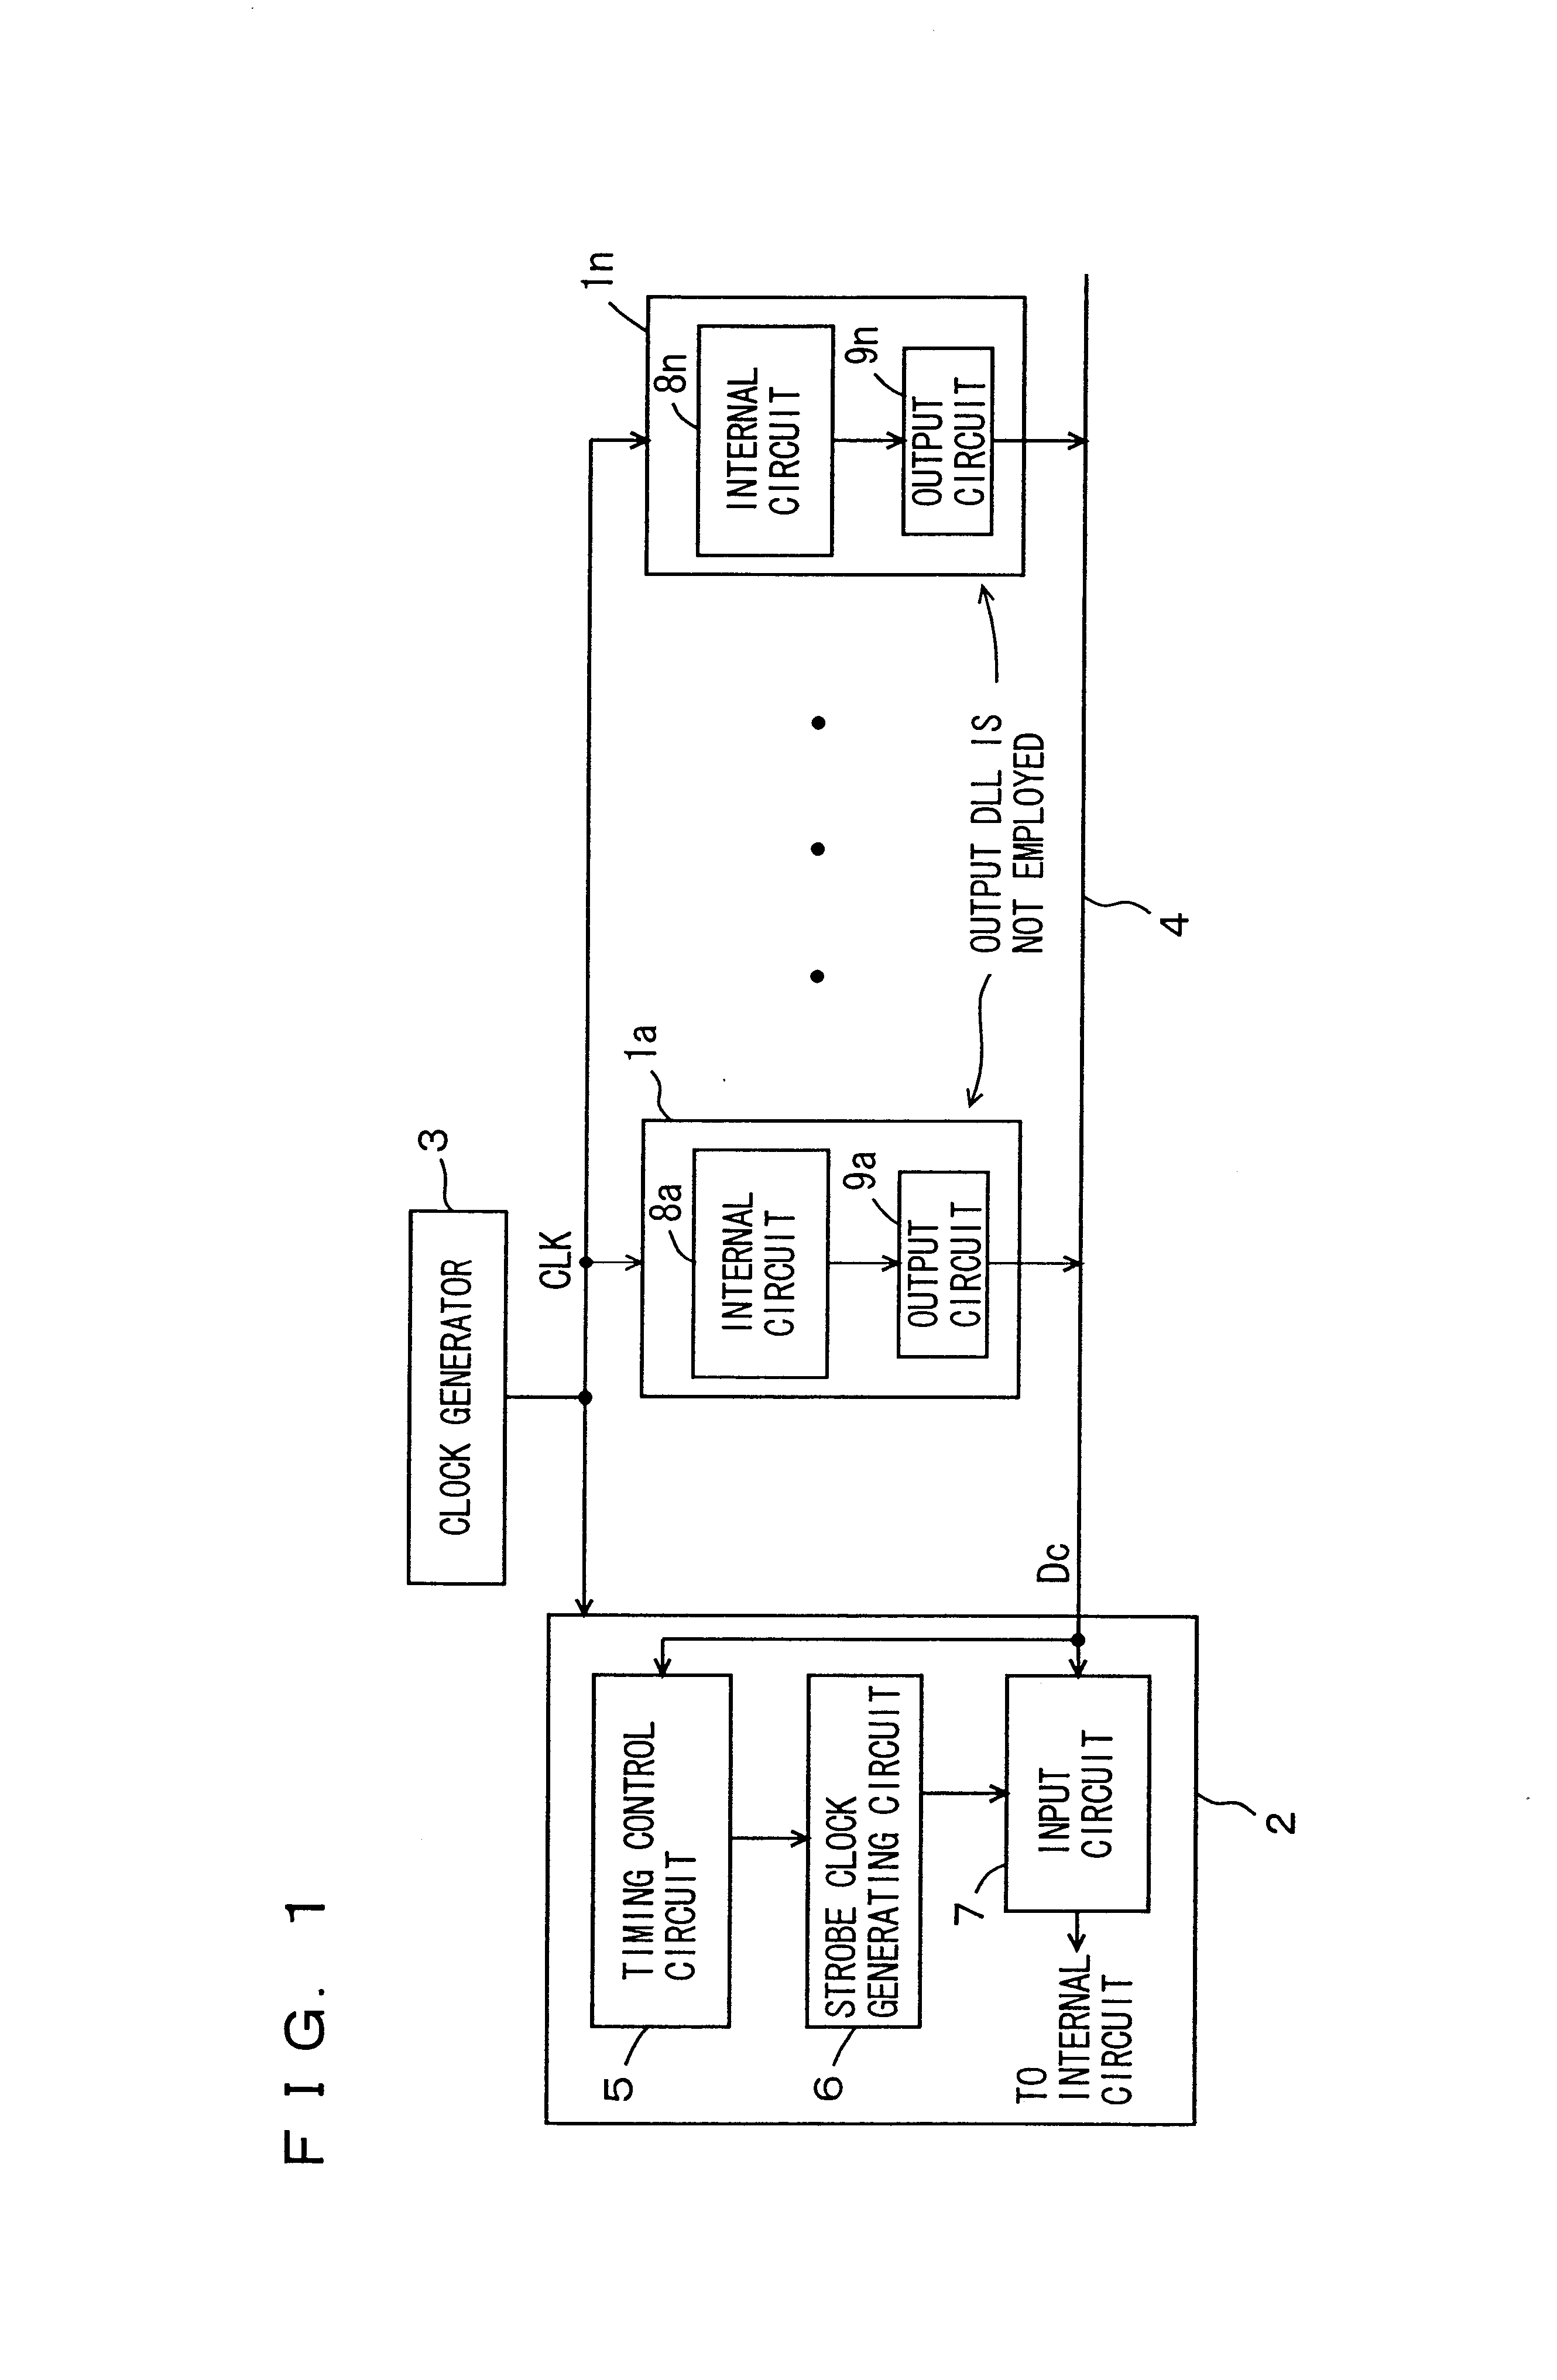 Interface circuit device for performing data sampling at optimum strobe timing by using stored data window information to determine the strobe timing